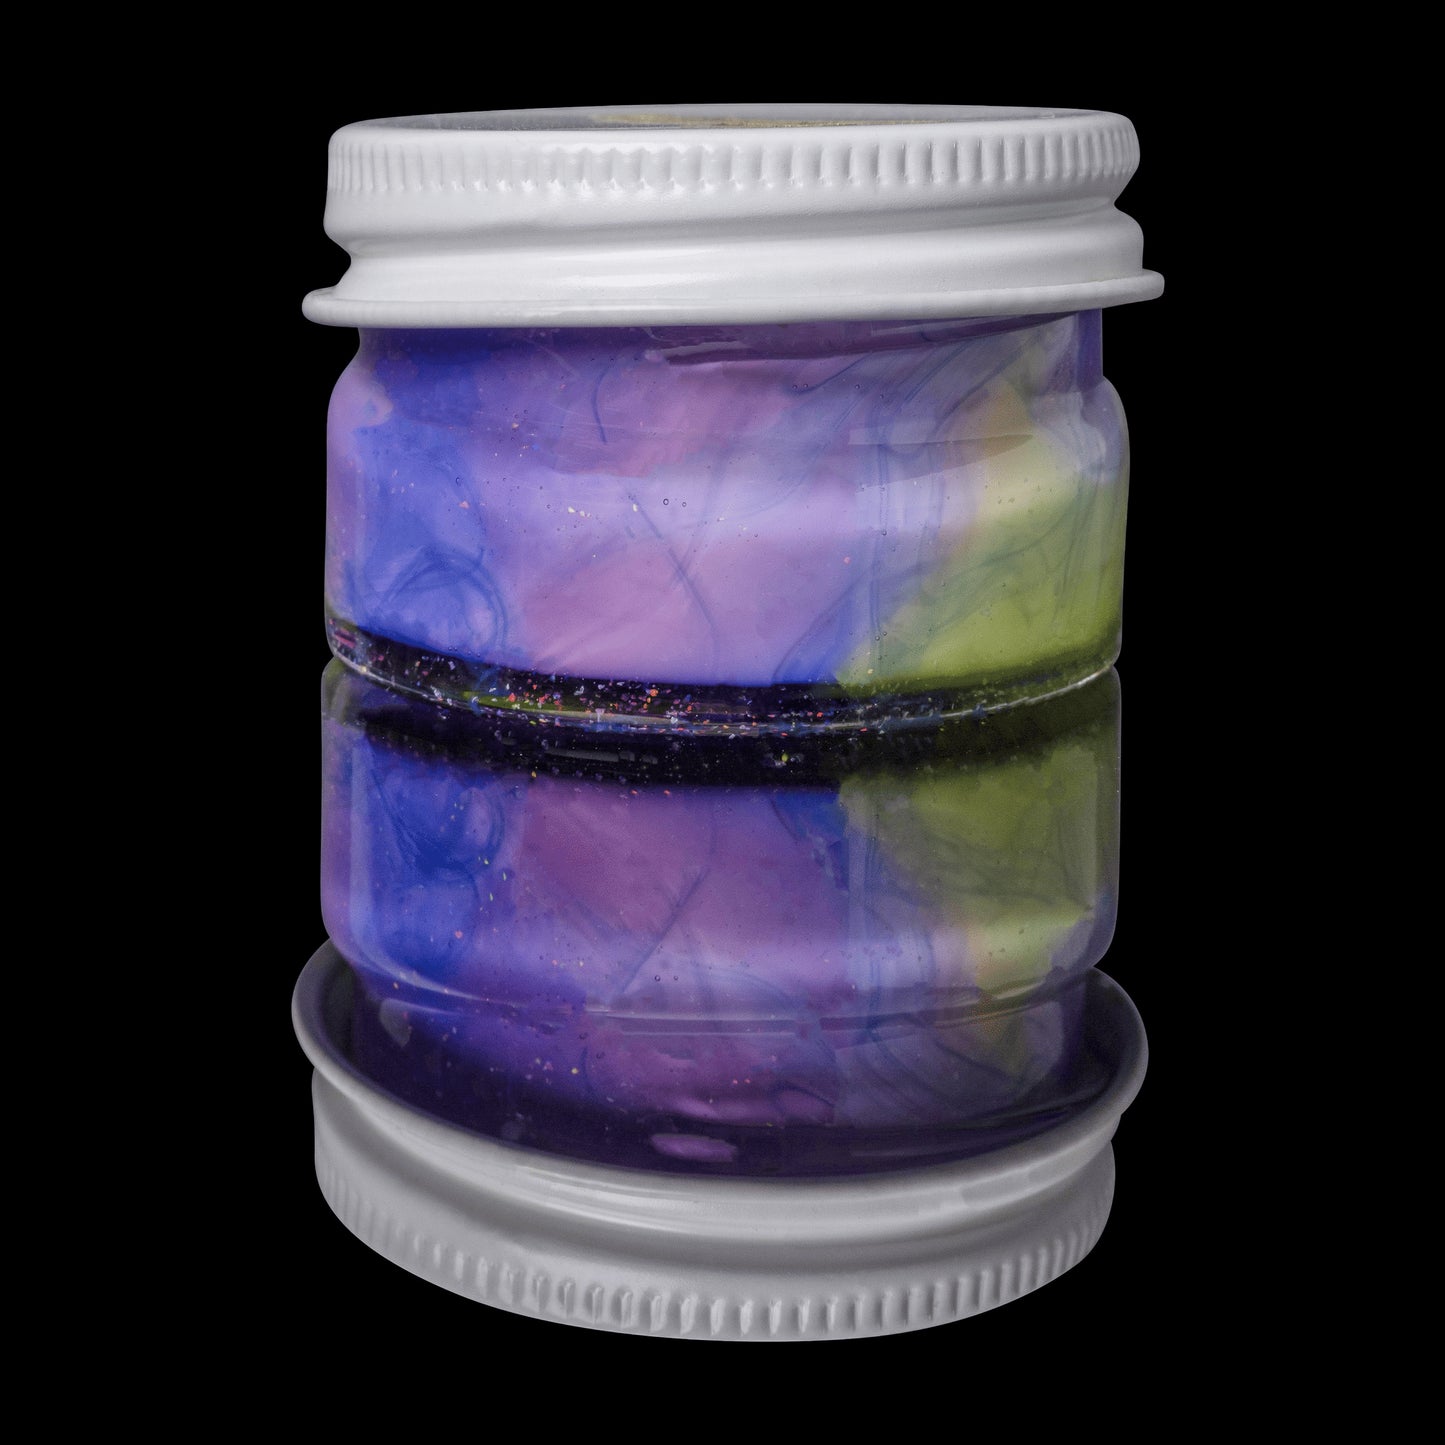 meticulously crafted art piece - Collab Baller Jar (F) by Baller Jar x Scomo Moanet (Scribble Season 2022)